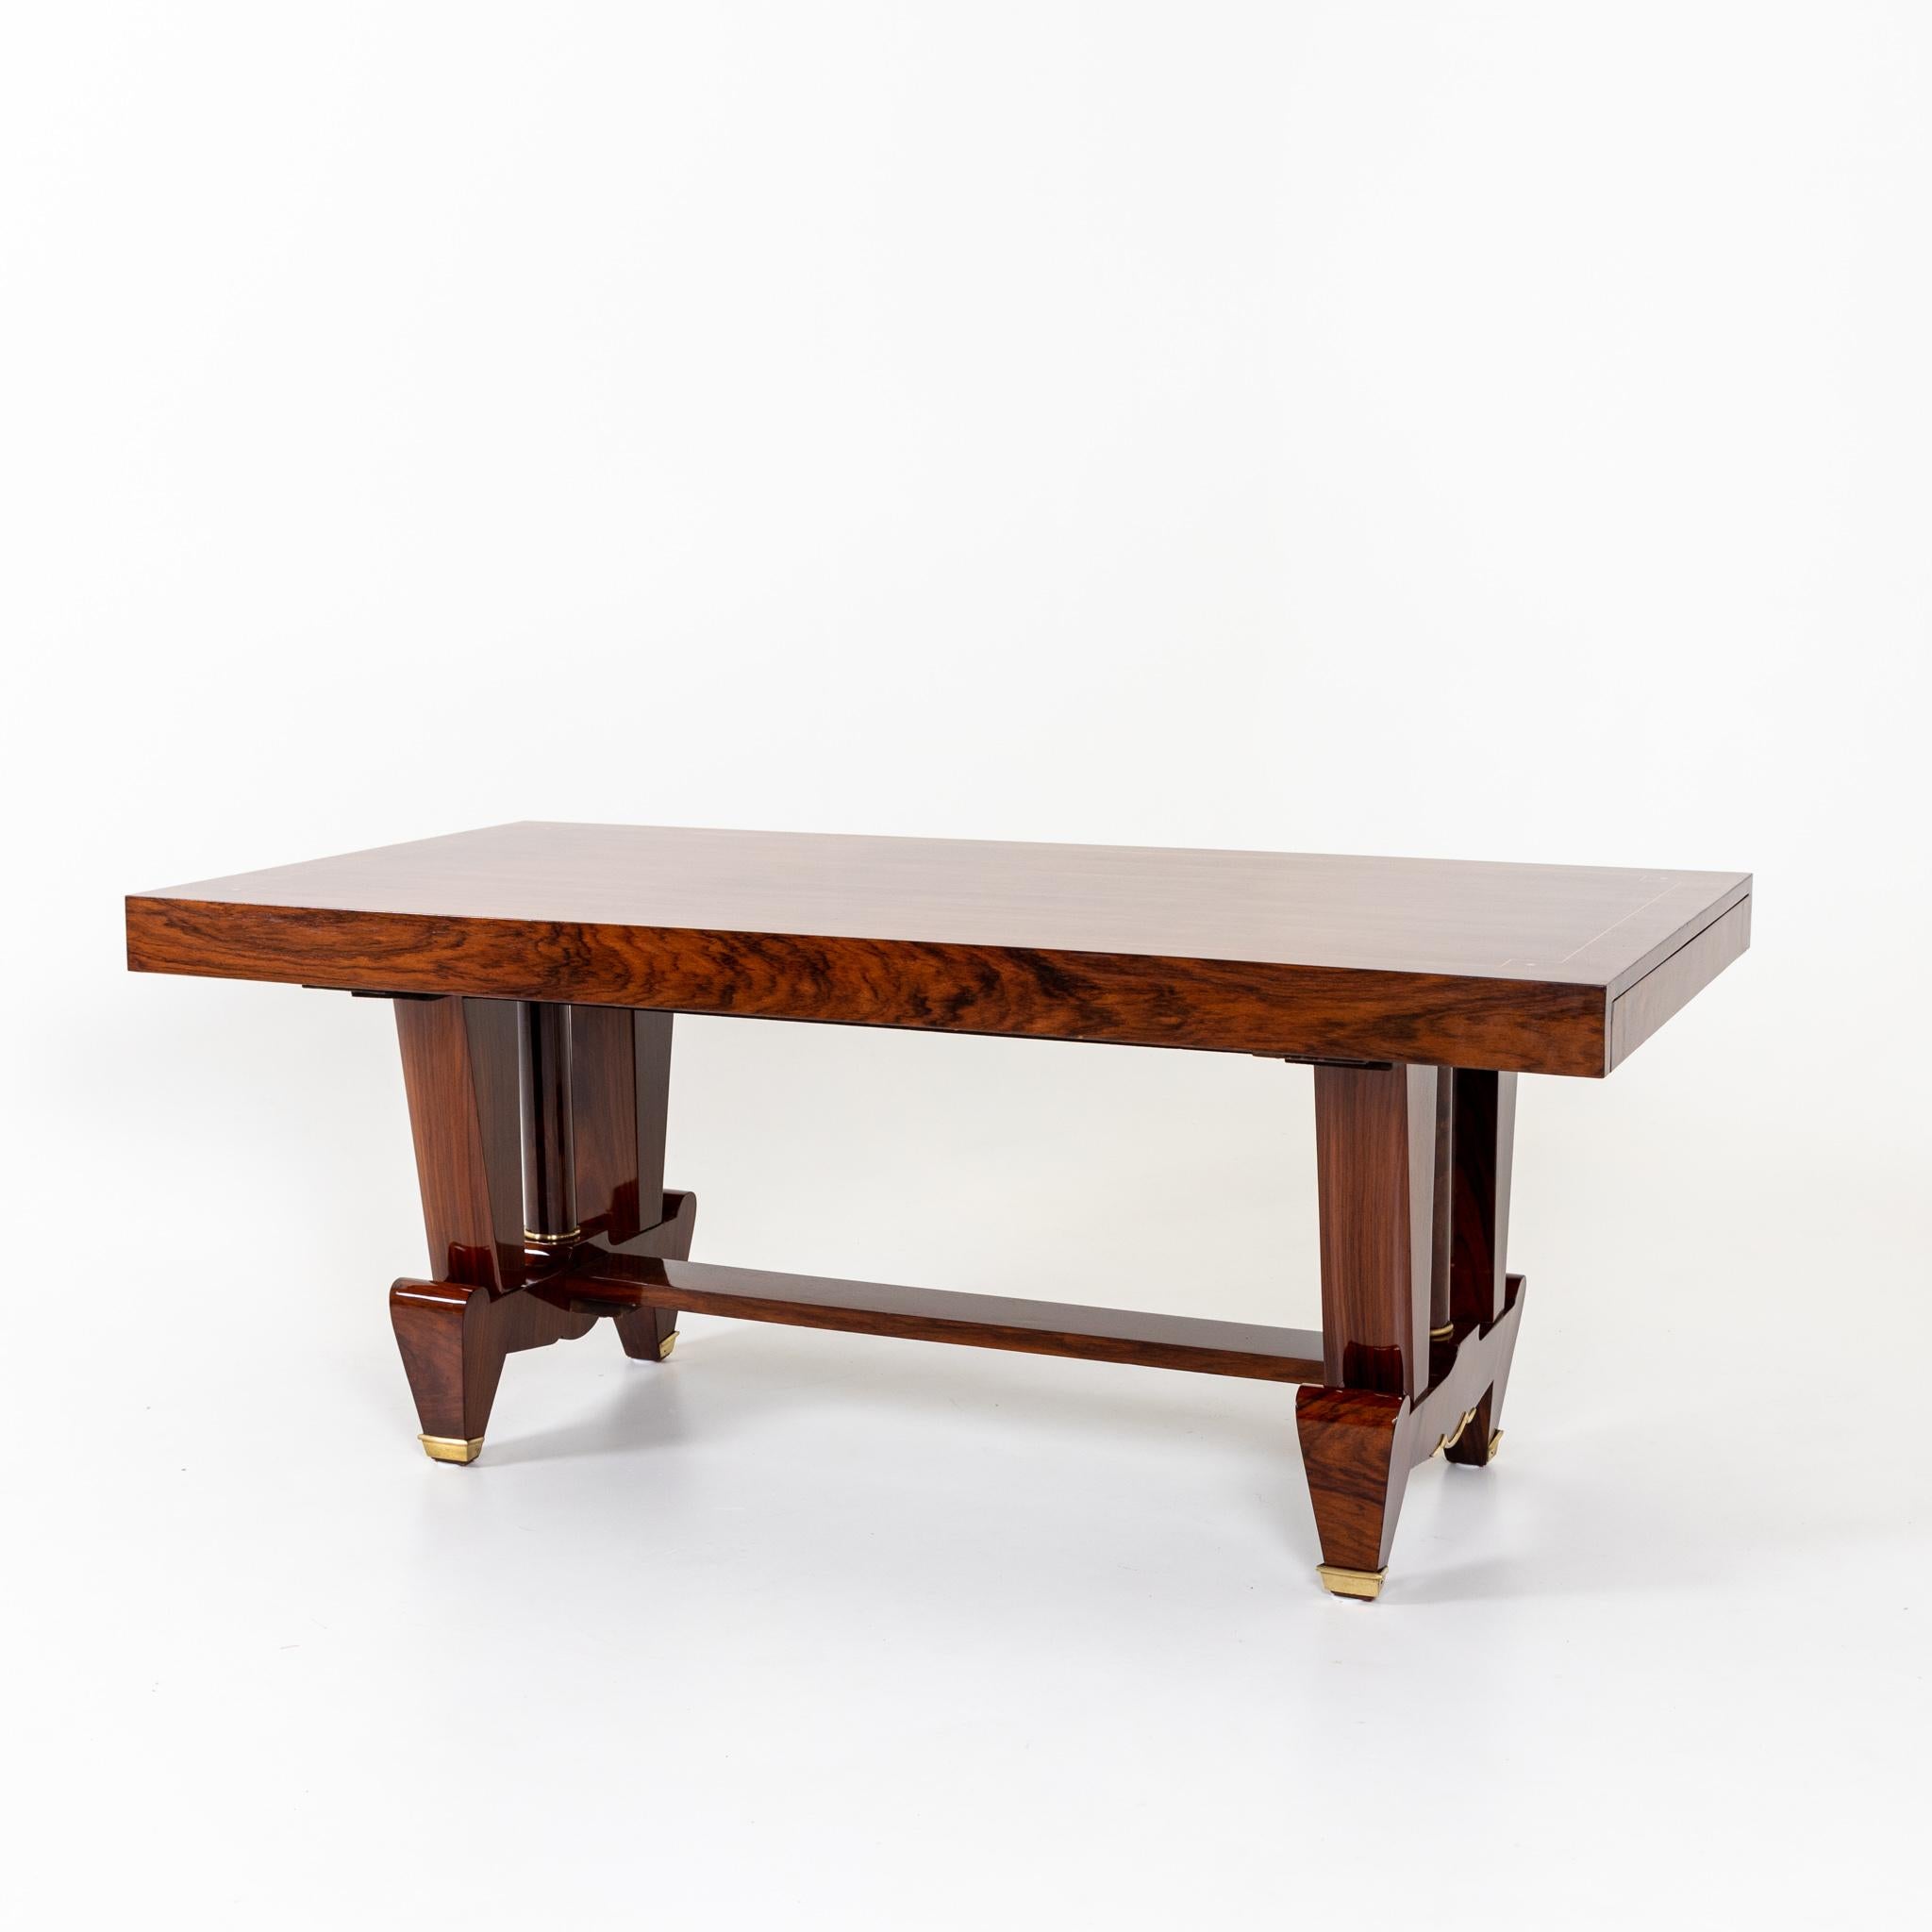 Wood Art Deco Dining Table, France Around 1920